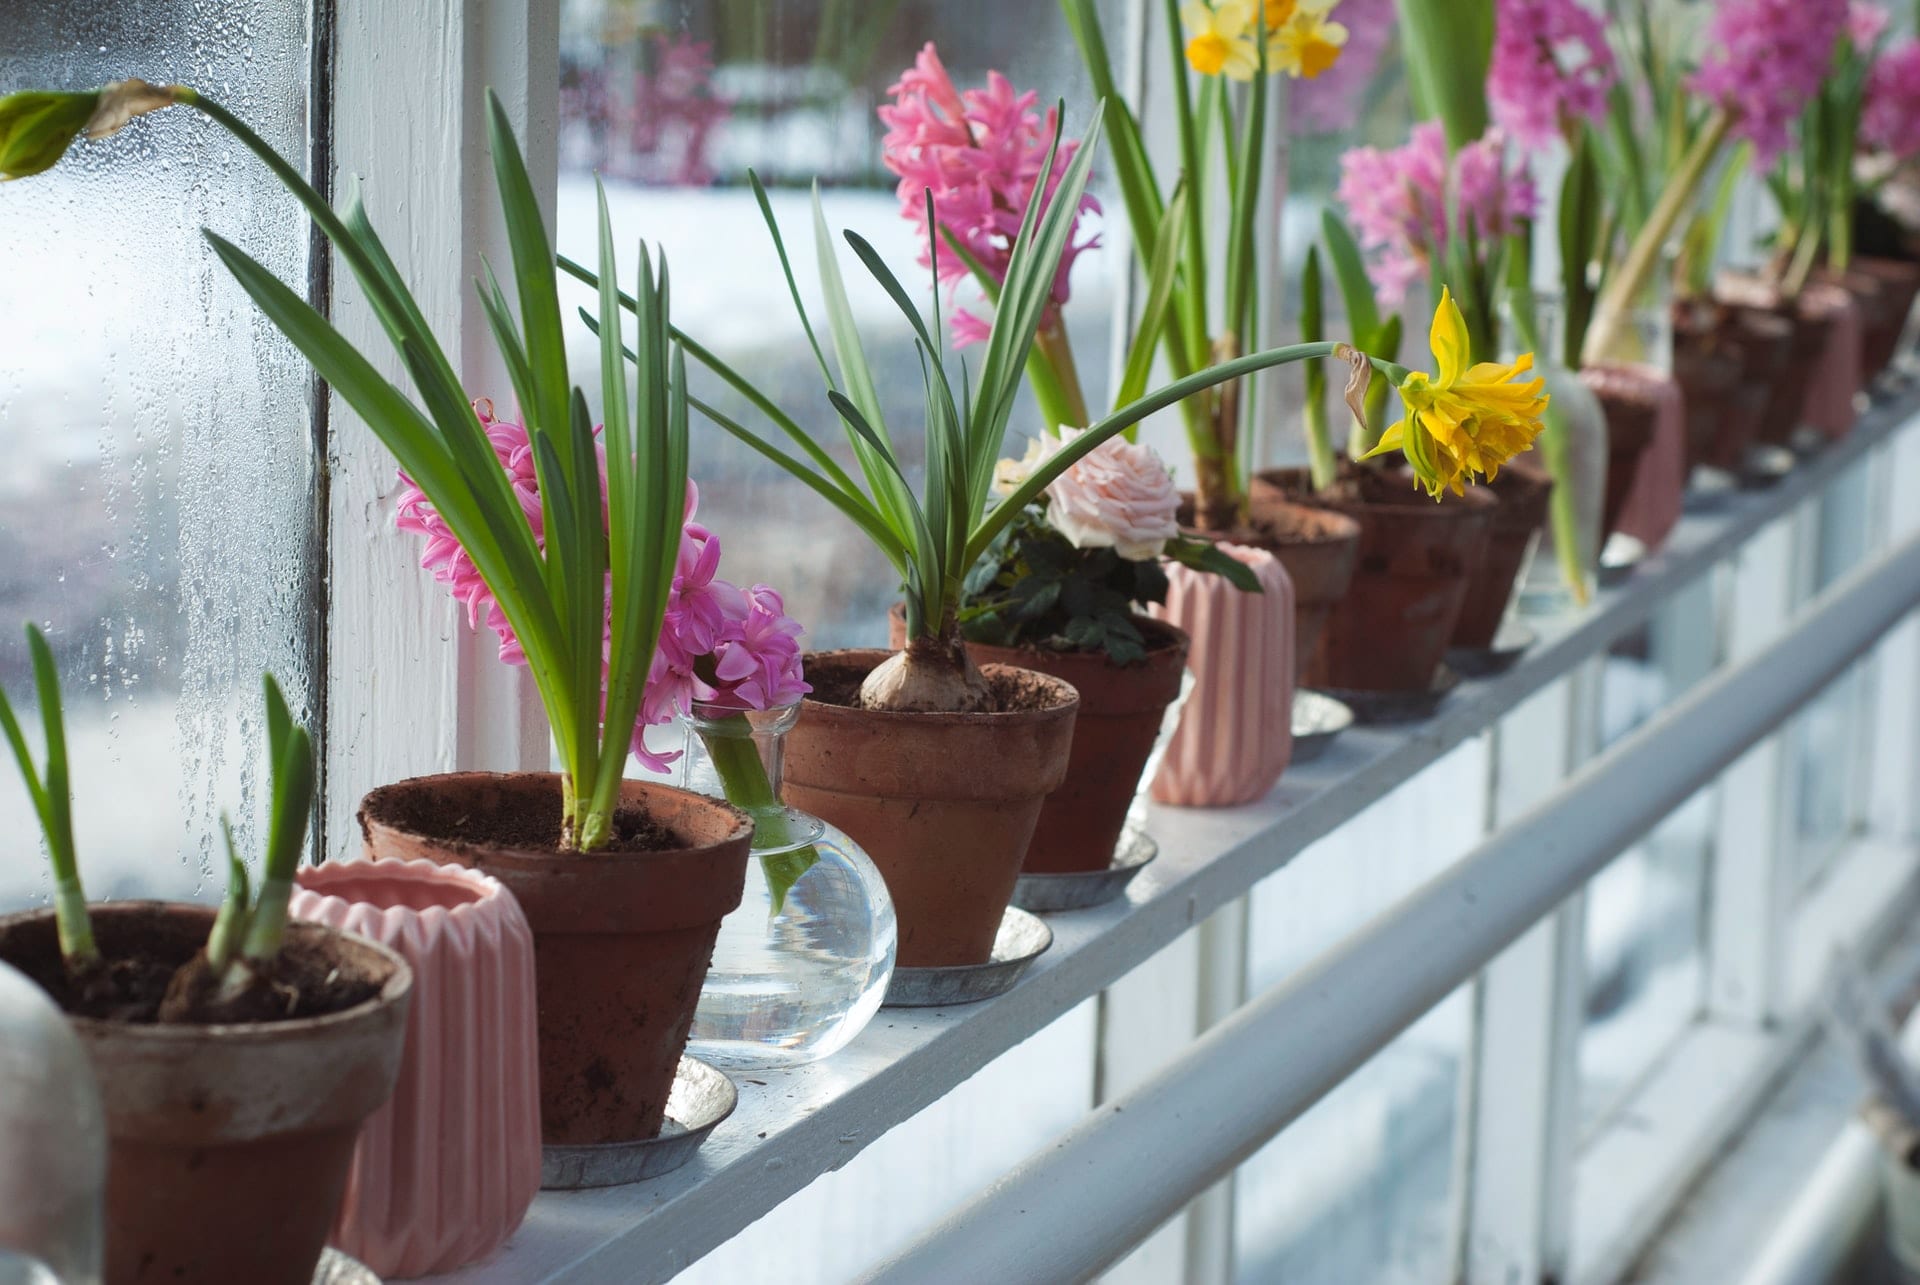 Spring bulbs and flowers in pots on a window sill